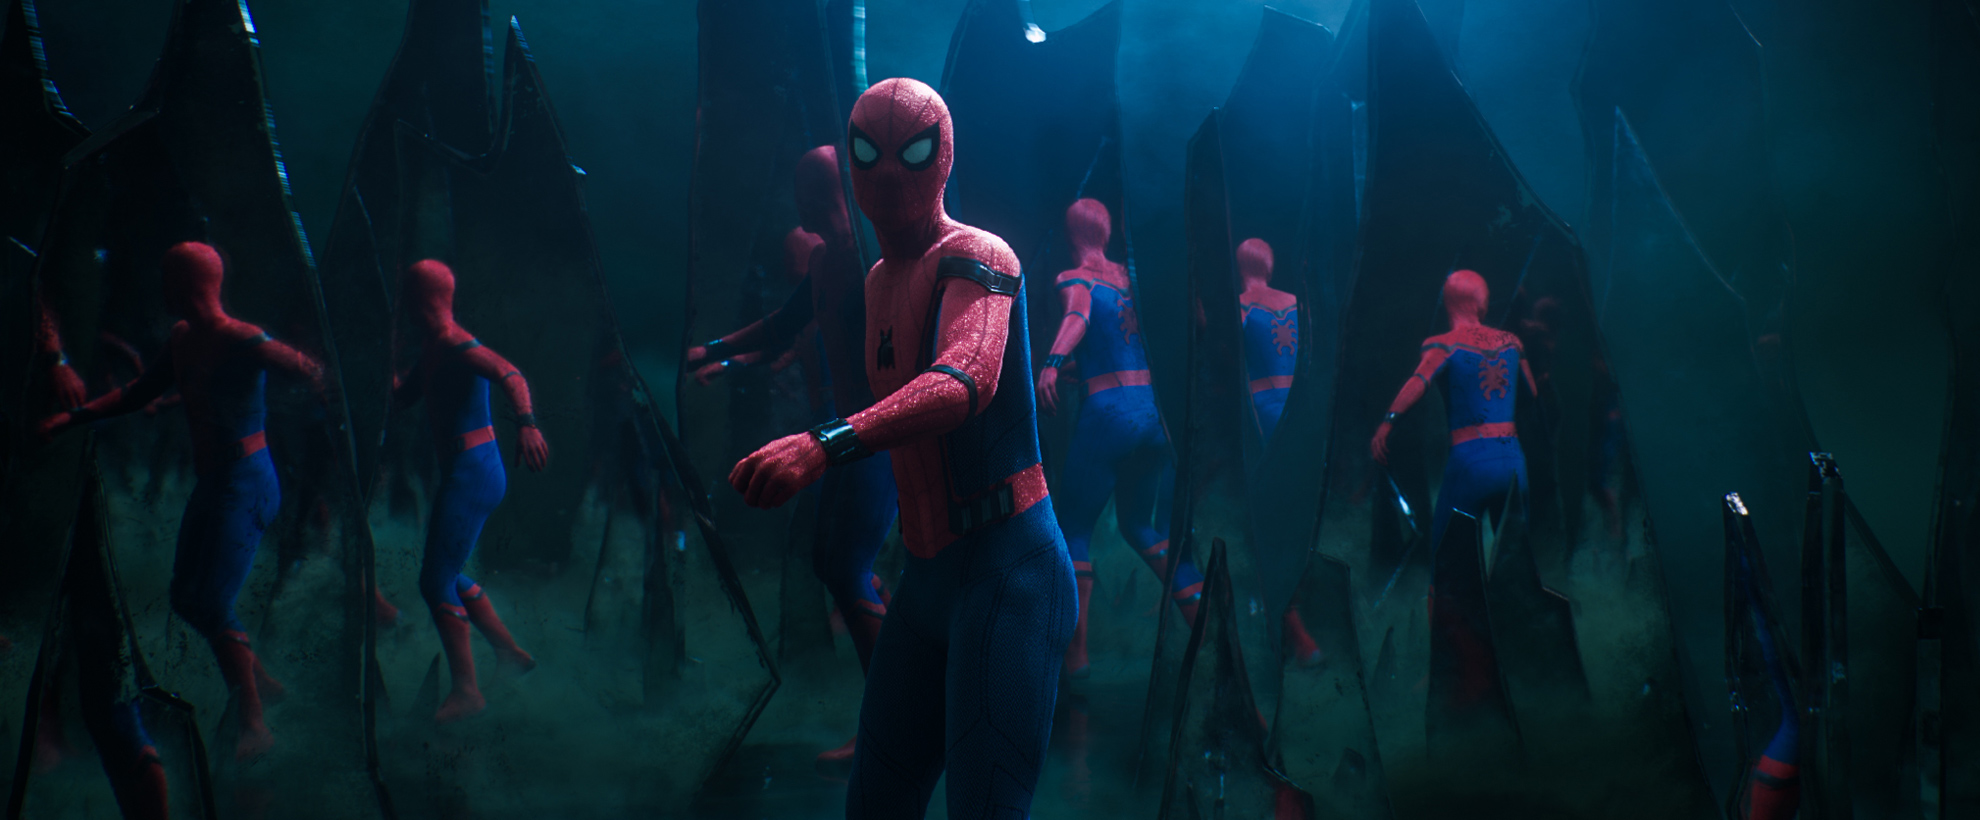 The illusion battle scene in Spider-Man Far From Home, Spider-Man is surrounded by versions of himself